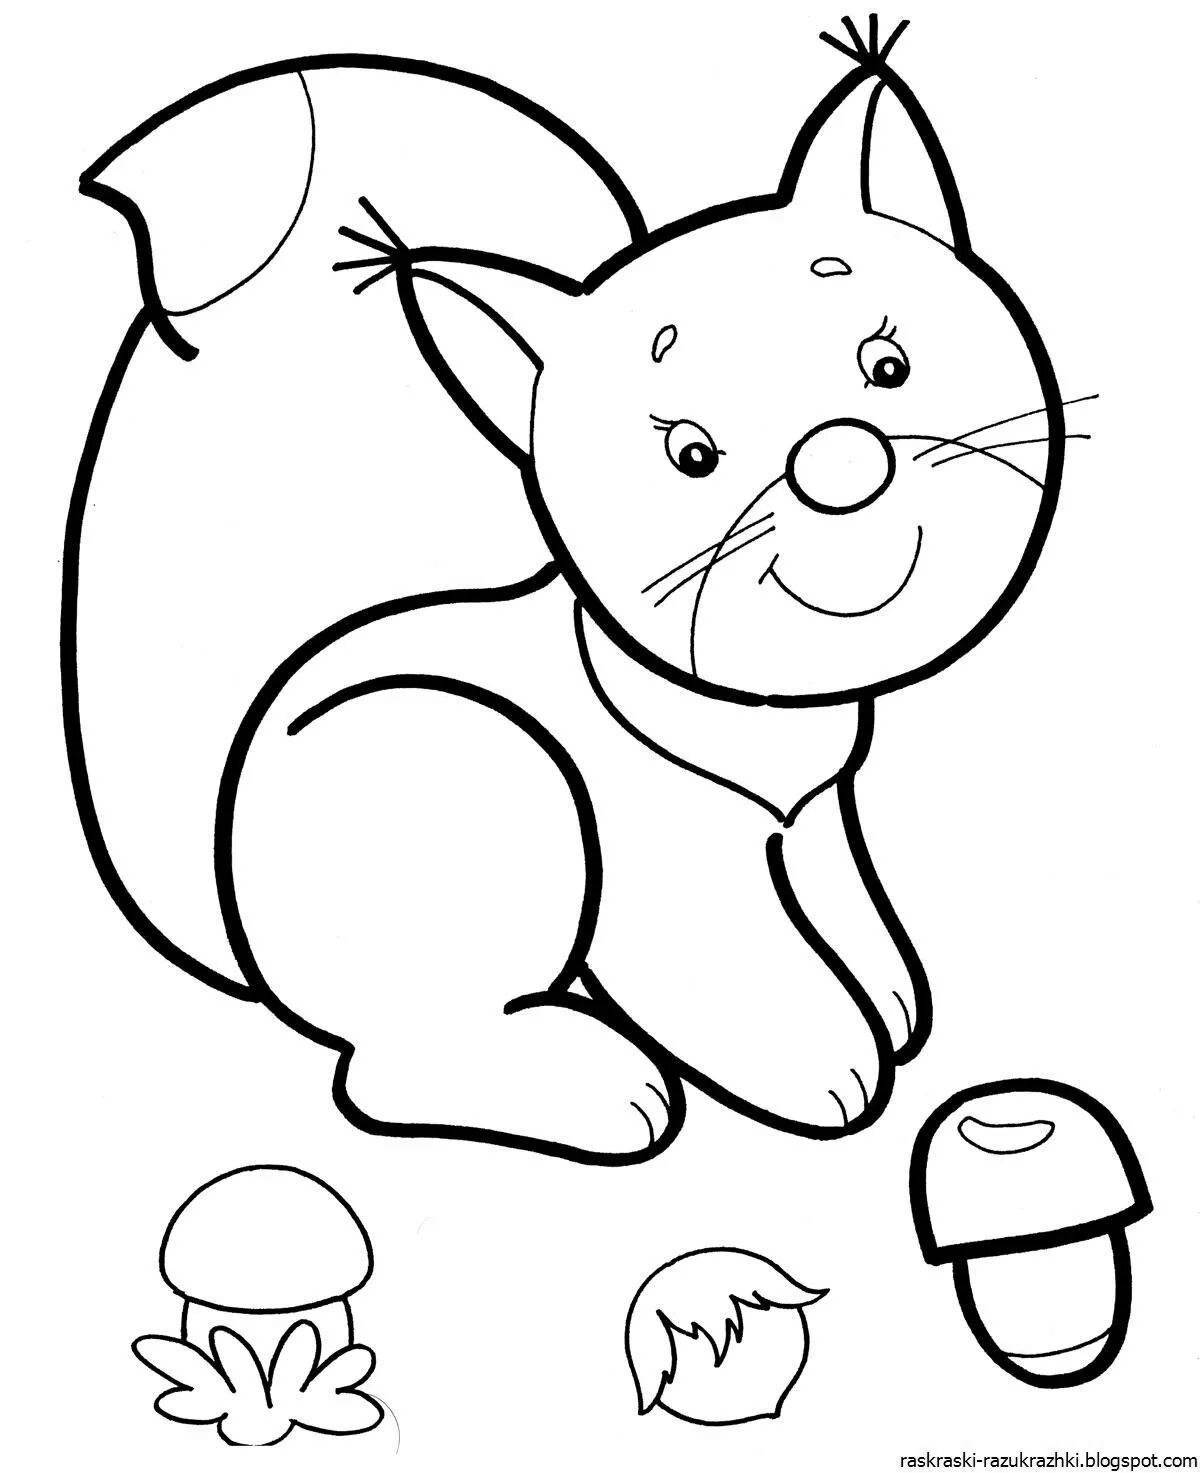 Adorable animal coloring pages for 5 year olds